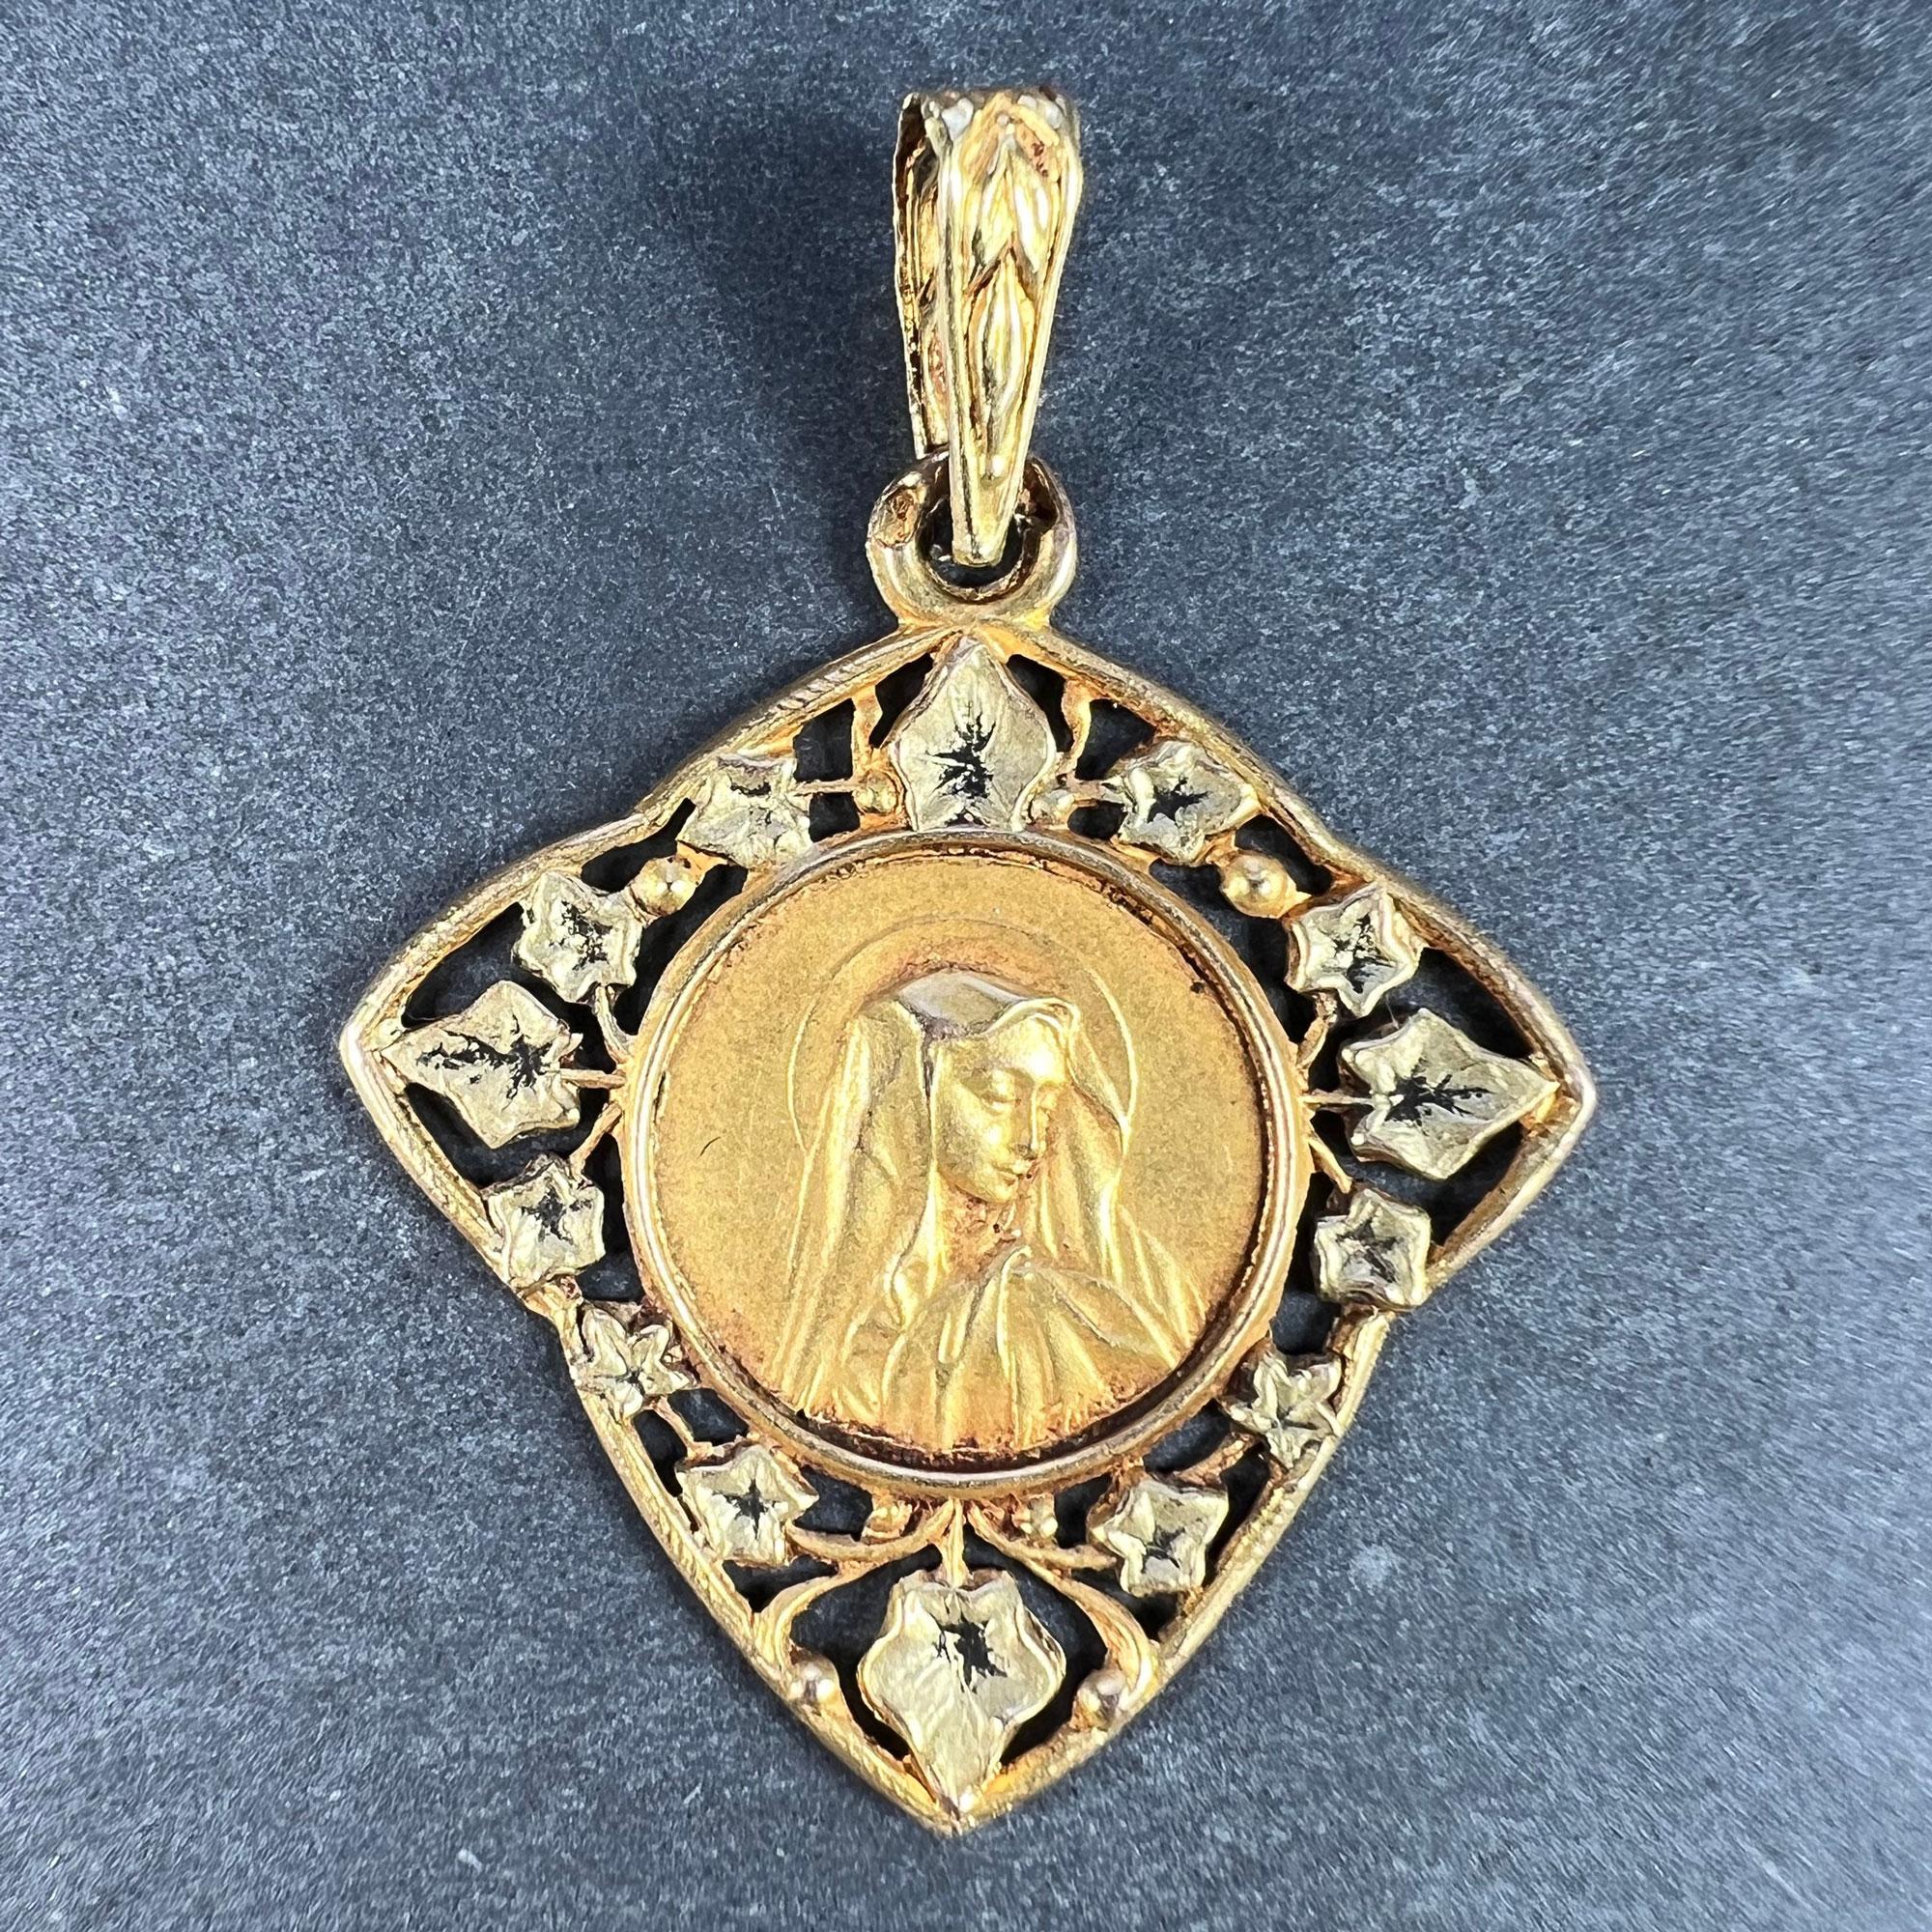 A French 18 karat (18K) yellow gold charm pendant designed as a round medal depicting the Virgin Mary within a pierced frame of ivy leaves symbolising eternal love, the whole shaped as an ivy leaf. Stamped with the eagle's head for French